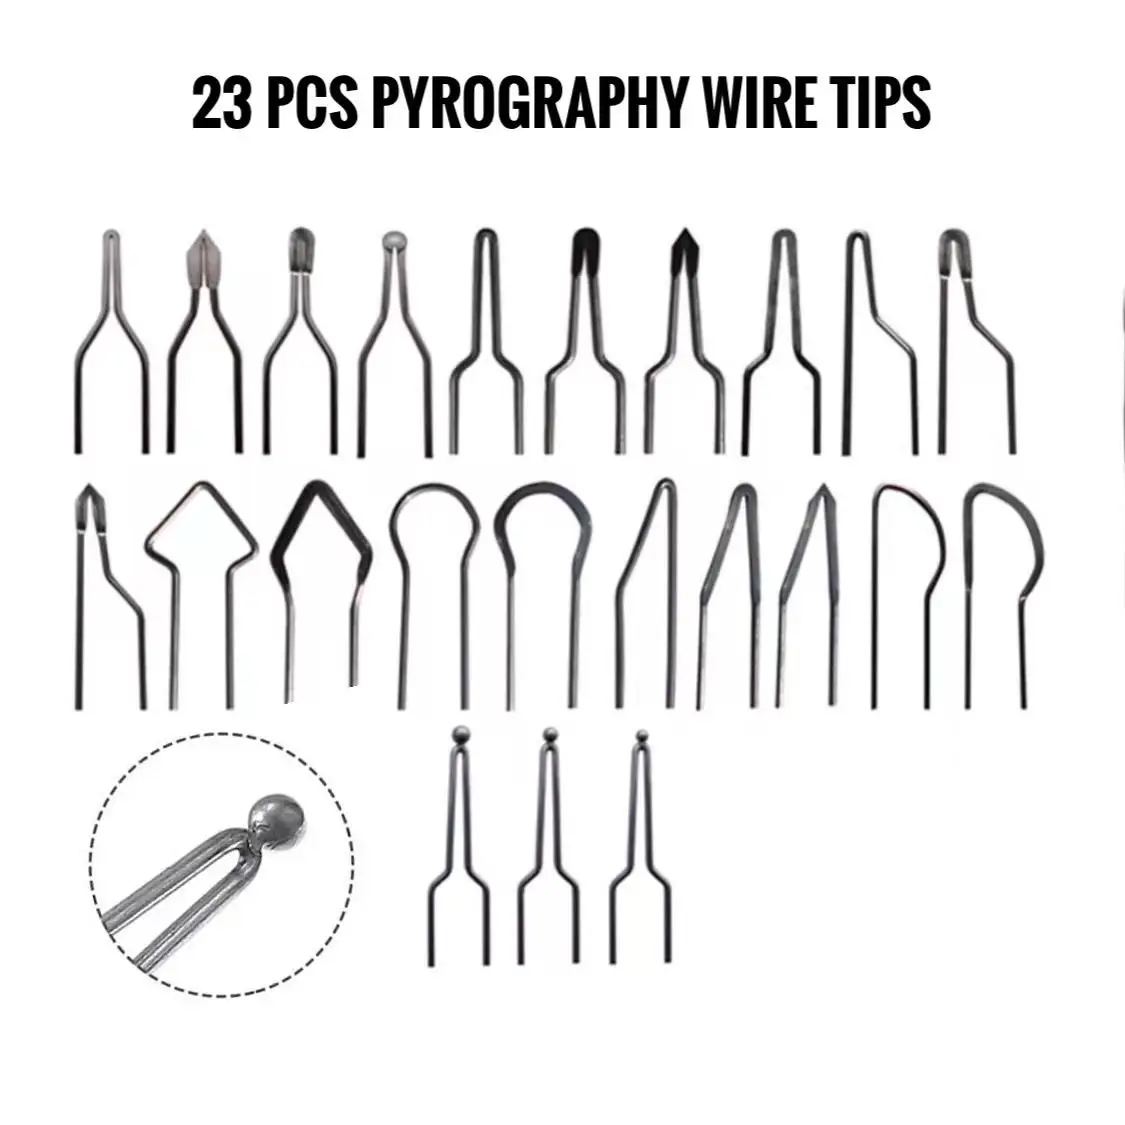 23Pcs/Set Pyrography Wire Tips Nickel Chromium Alloy Wood Burner Pyrography Pen Adjustable Temperature Pyrography Machine Parts wp 18 wp18 ly 200rw swivel rotary spin water cooled 1 4 28 thread tig torch head burner hose argon welding machine accessory